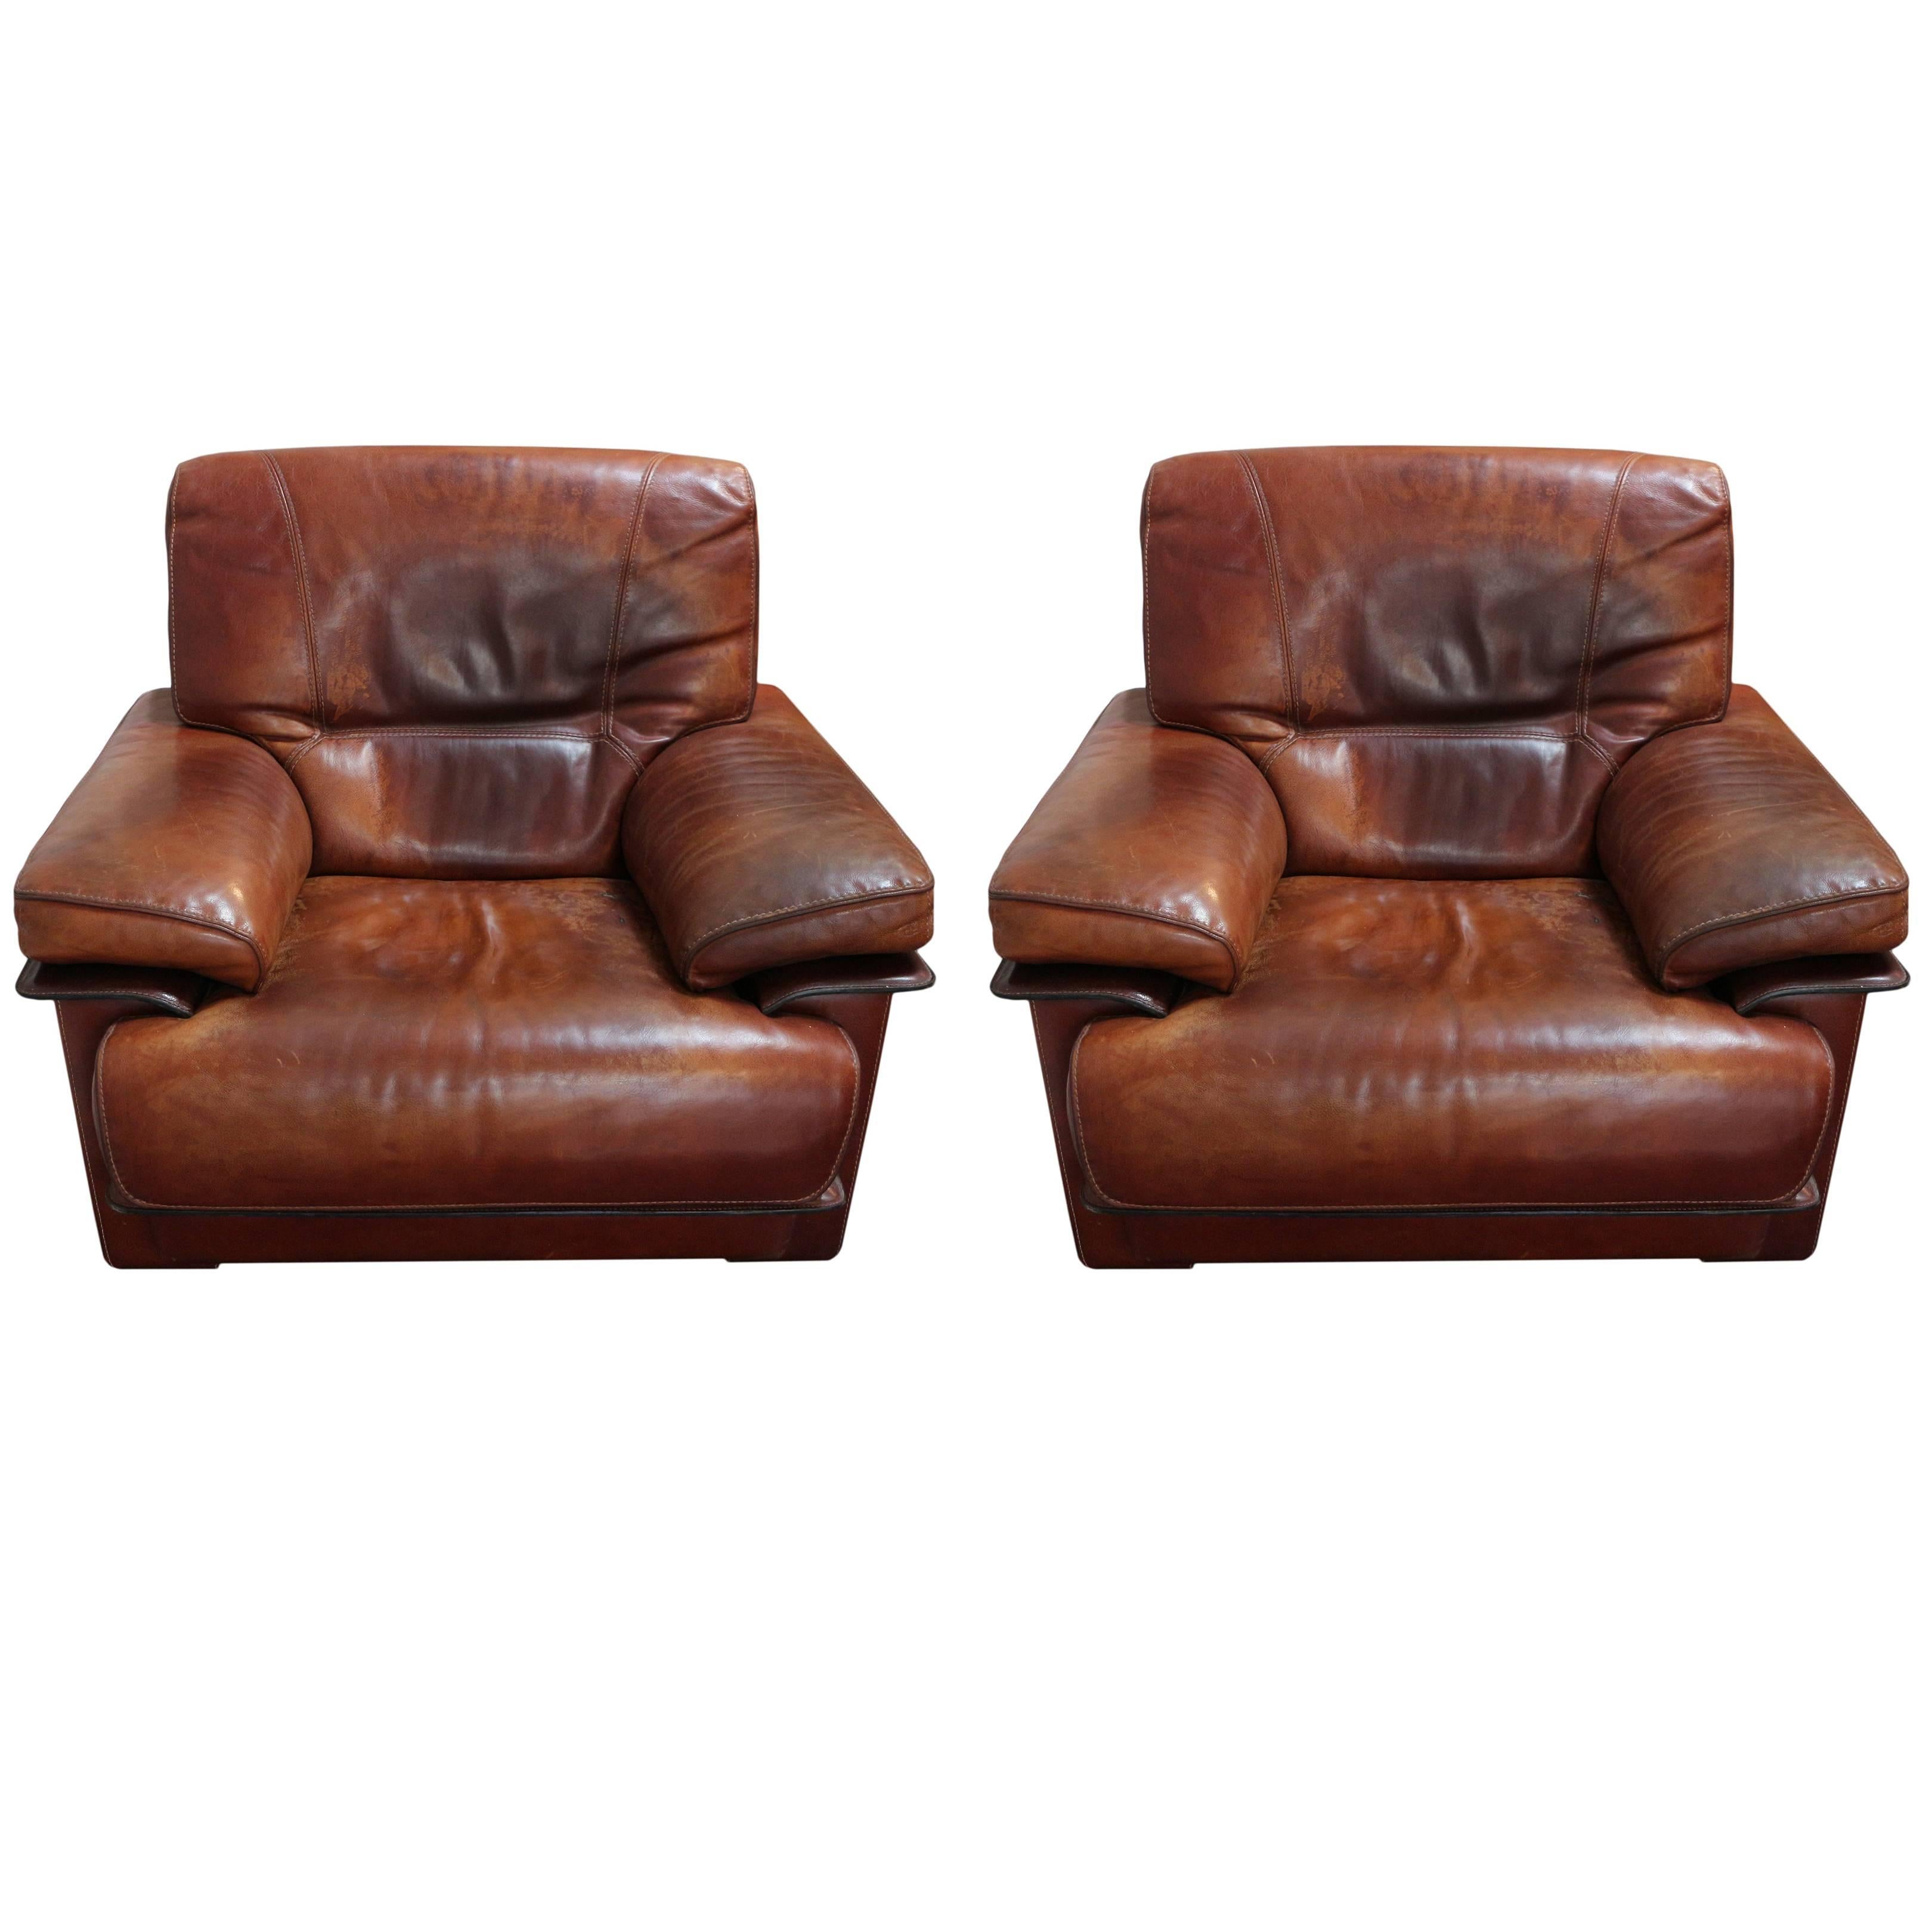 Pair of Leather Armchairs For Sale